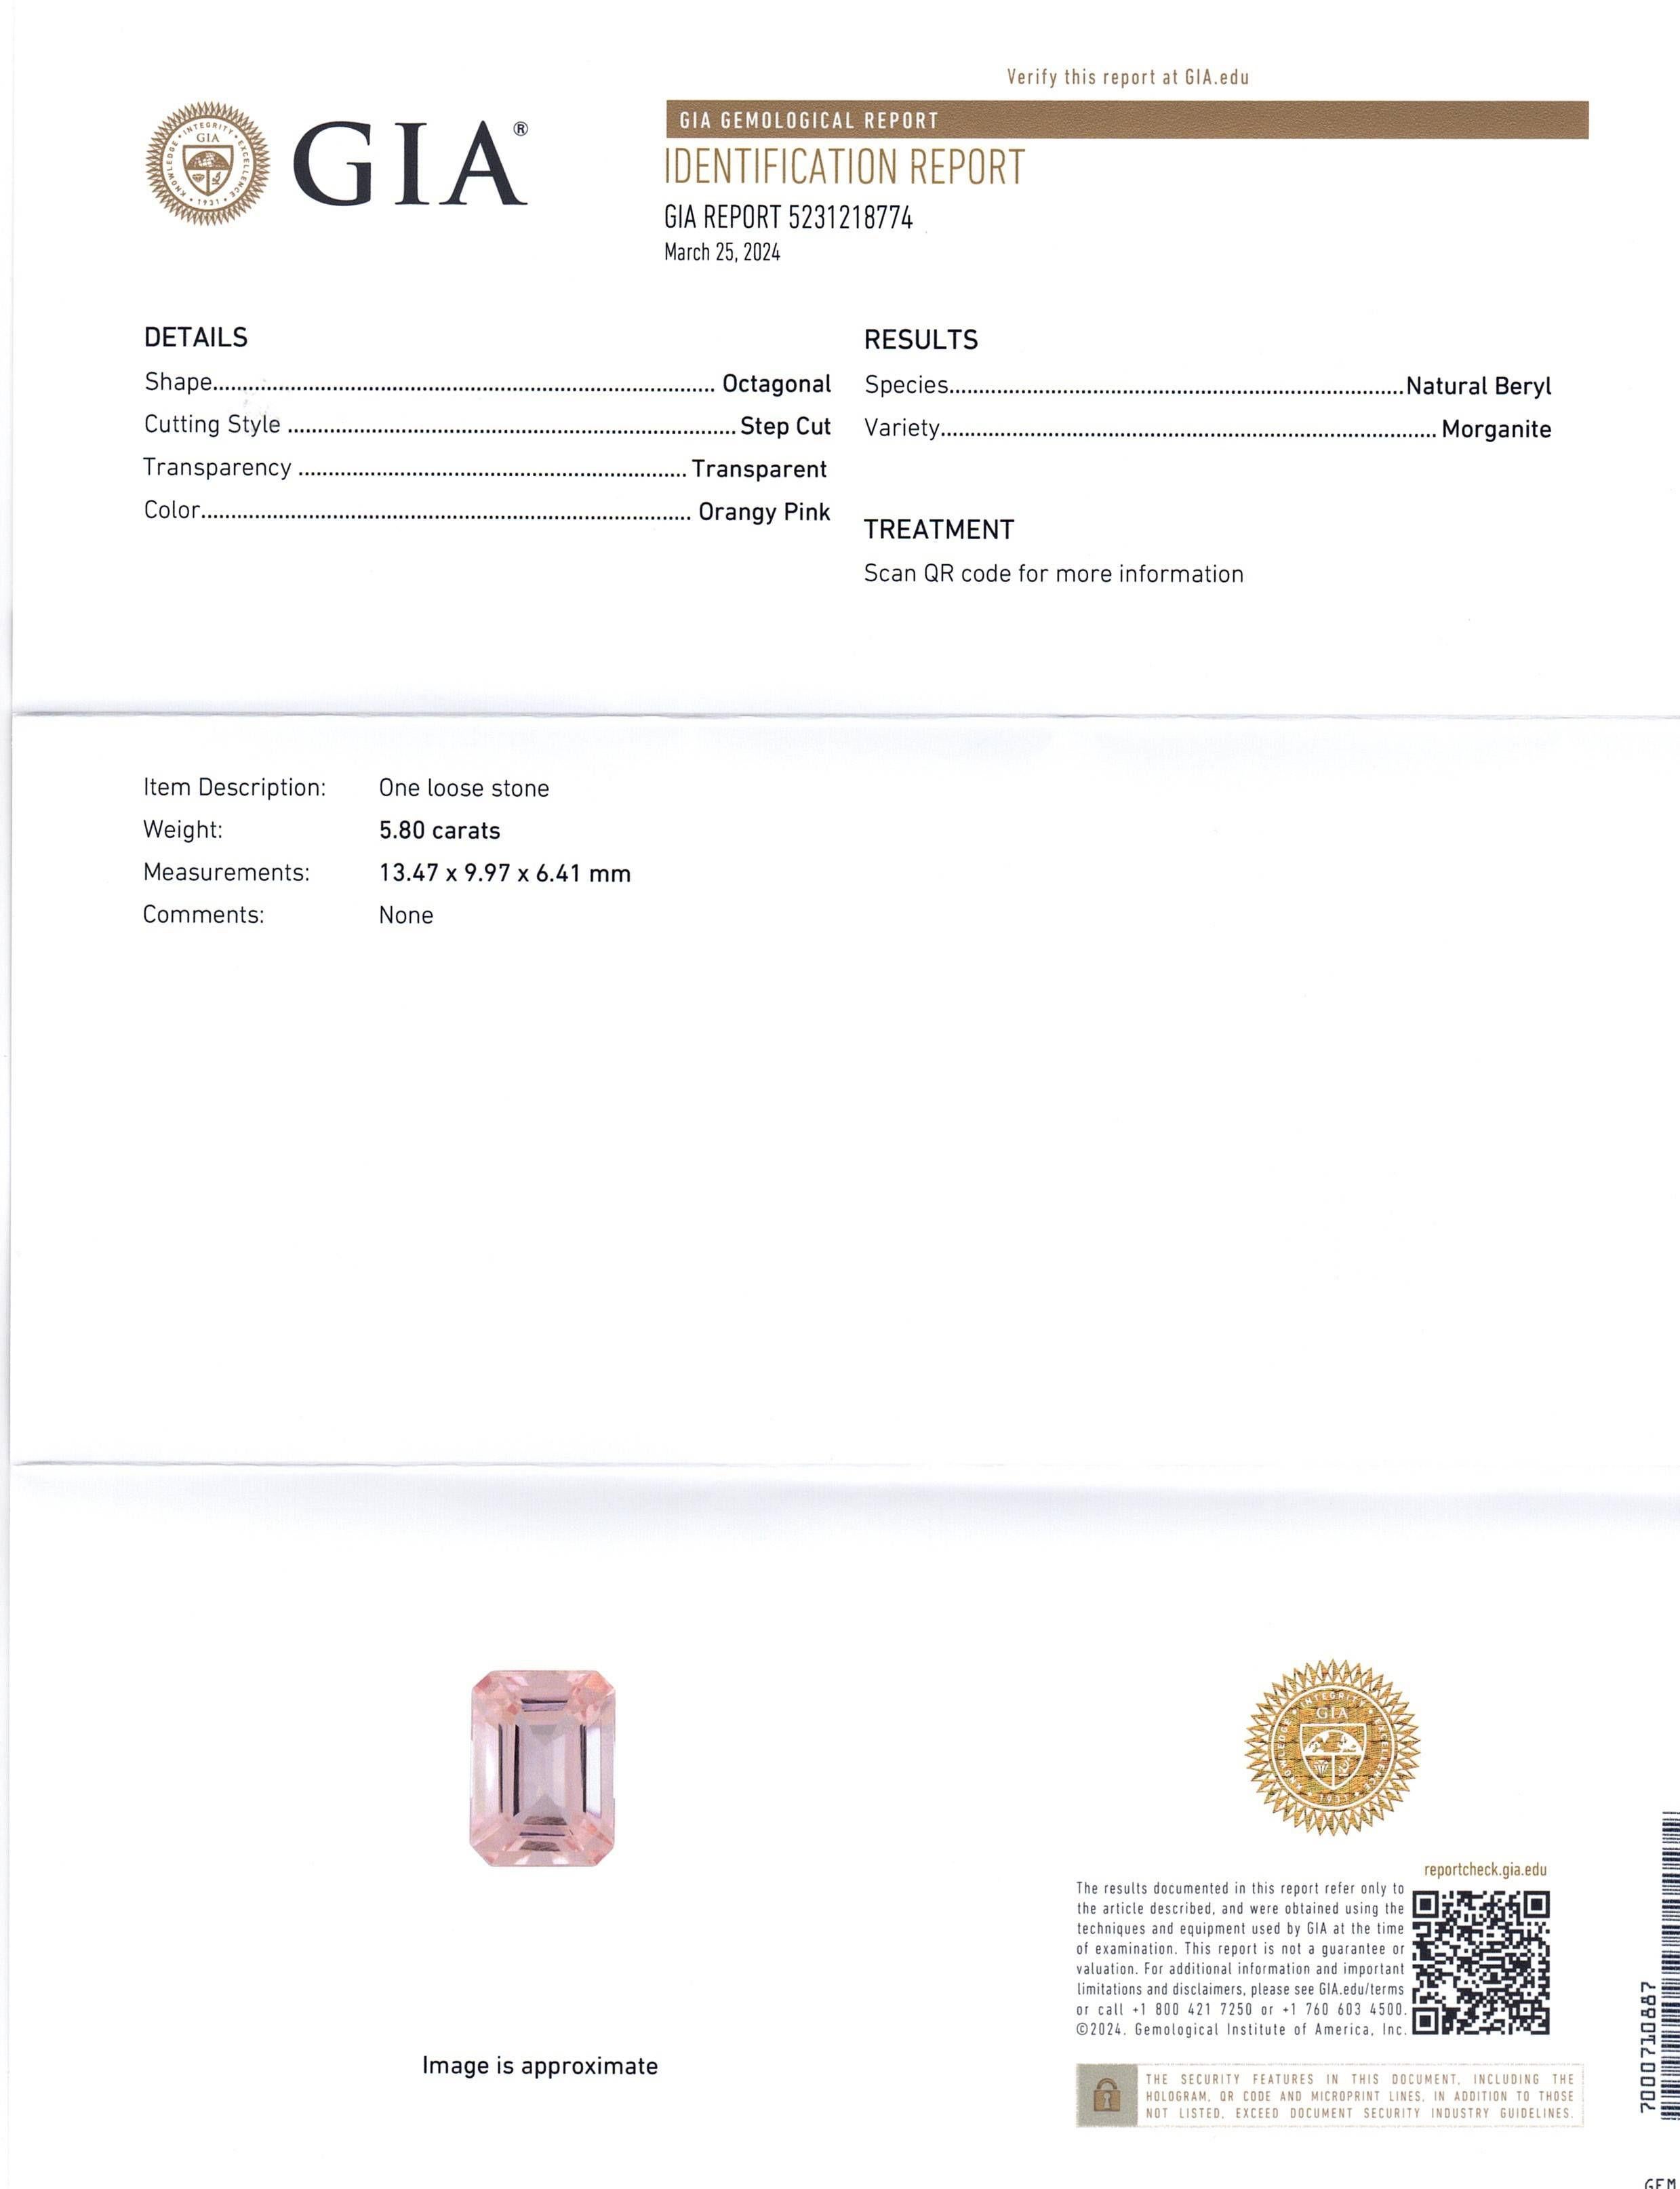 This is a stunning GIA Certified Morganite 


The GIA report reads as follows:

GIA Report Number: 5231218774
Shape: Octagonal
Cutting Style: Step Cut
Cutting Style: Crown: 
Cutting Style: Pavilion: 
Transparency: Transparent
Colour: Orangy